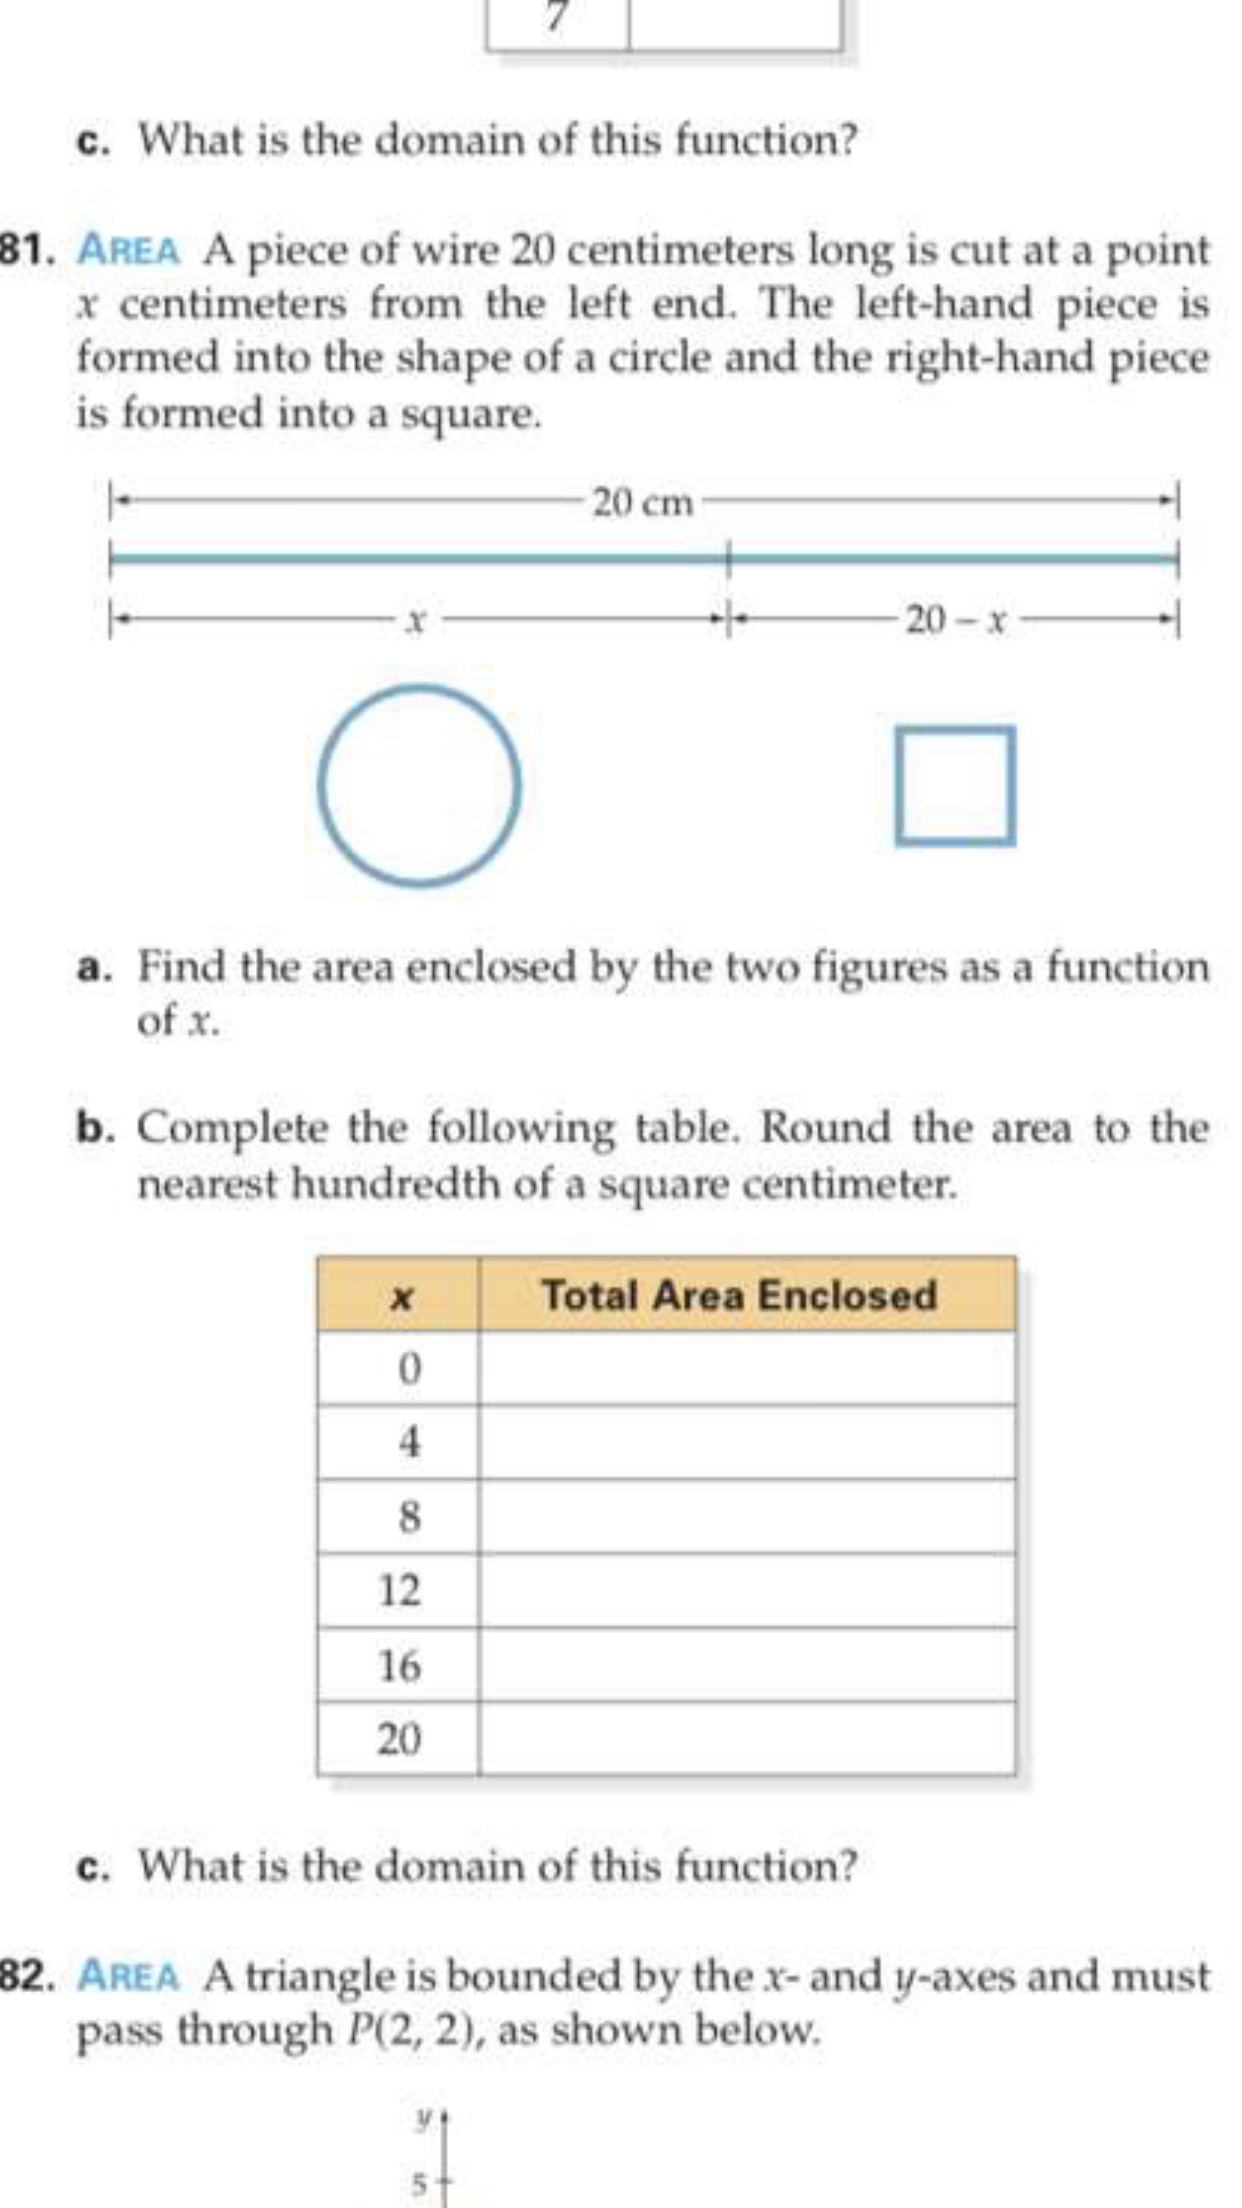 c. What is the domain of this function?
81. AREA A piece of wire 20 centimeters long is cut at a point
x centimeters from the left end. The left-hand piece is
formed into the shape of a circle and the right-hand piece
is formed into a square.
20 cm
20 - x
a. Find the area enclosed by the two figures as a function
of x.
b. Complete the following table. Round the area to the
nearest hundredth of a square centimeter.
Total Area Enclosed
х
12
16
c. What is the domain of this function?
82. AREA A triangle is bounded by the x- and y-axes and must
pass through P(2, 2), as shown below.
5+
